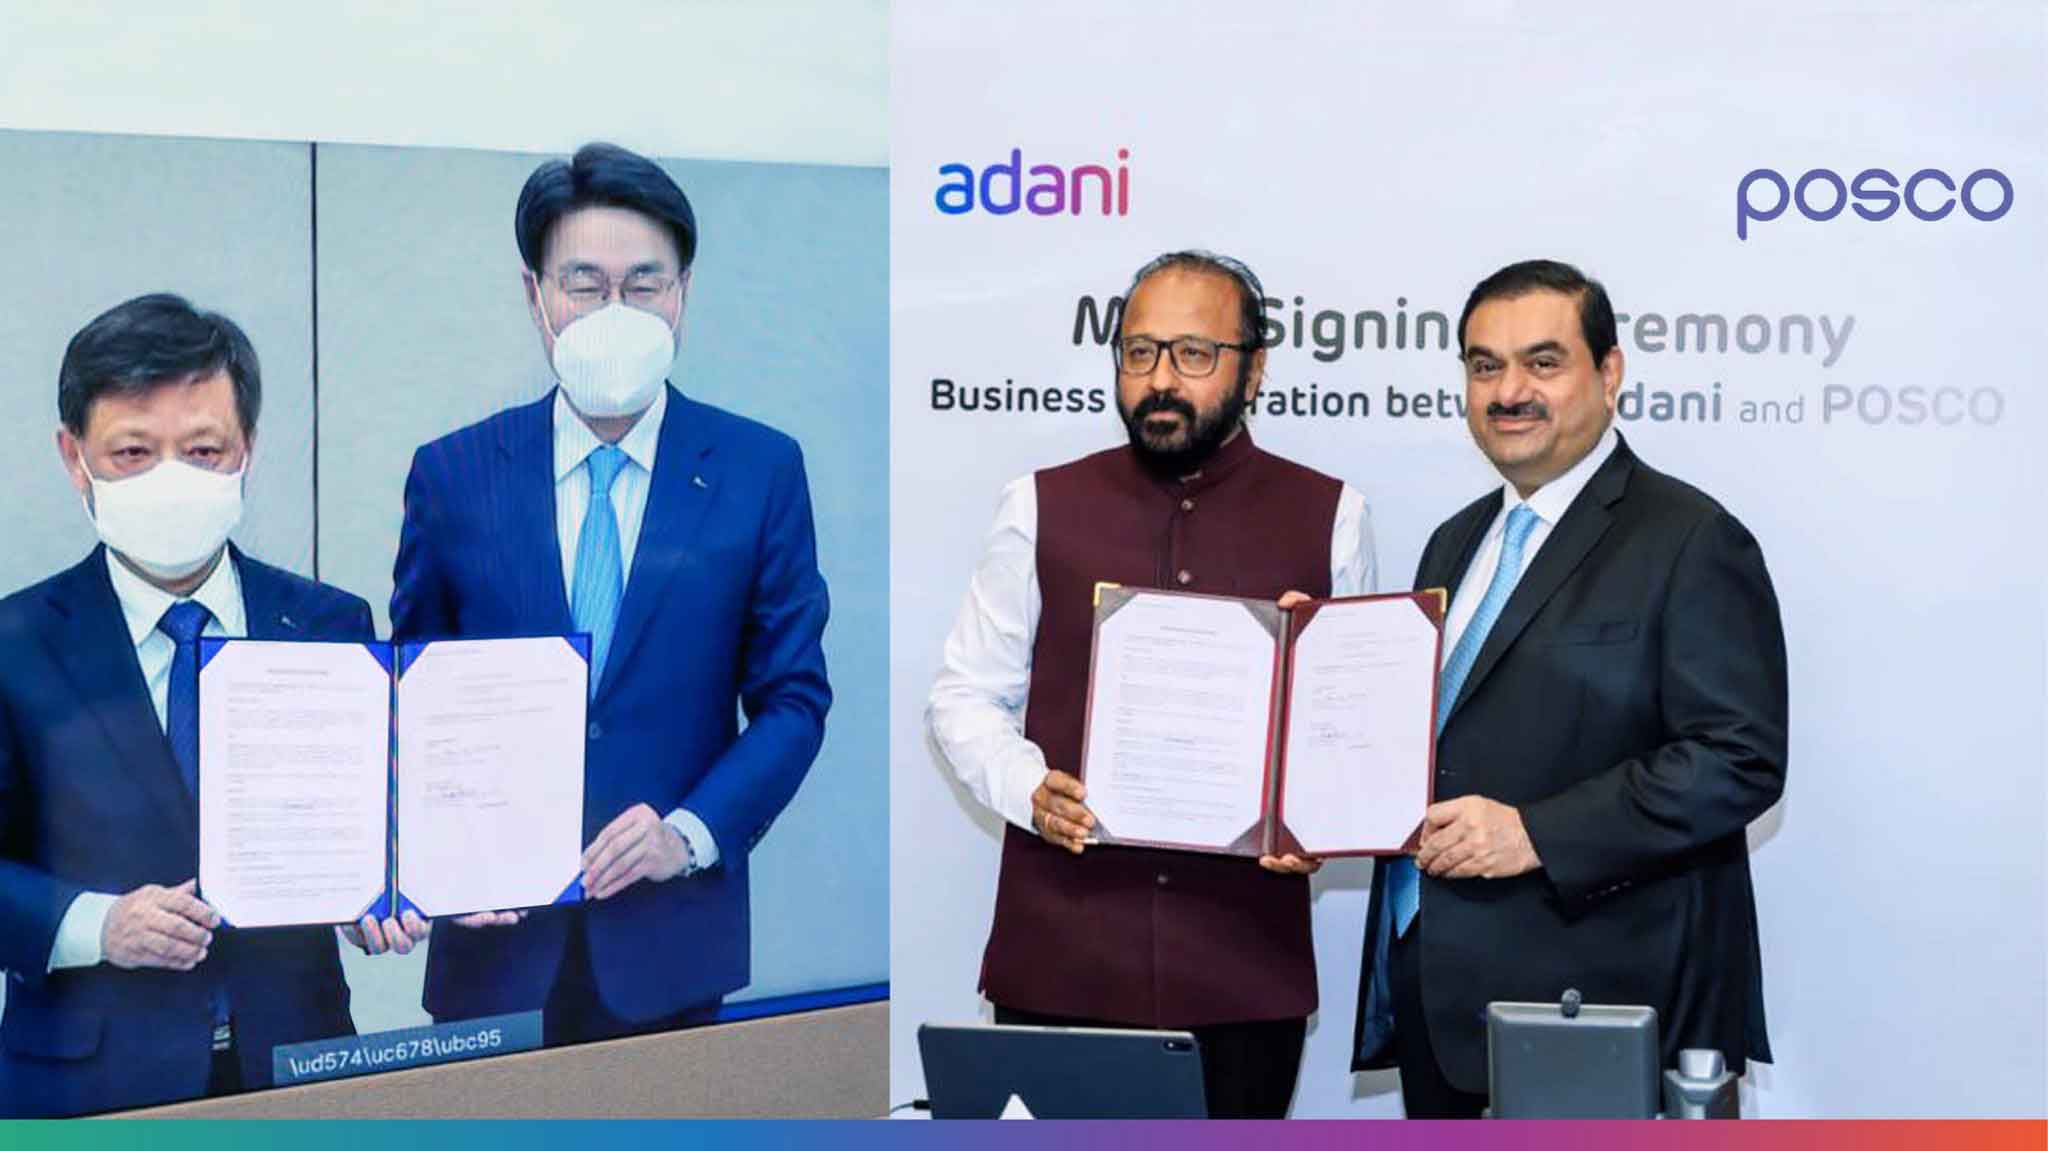 Adani Group launches a $5 Bn partnership with POSCO, the world’s most efficient and advanced steel manufacturer, for a green environment-friendly Integrated Steel Mill and other businesses in Mundra.